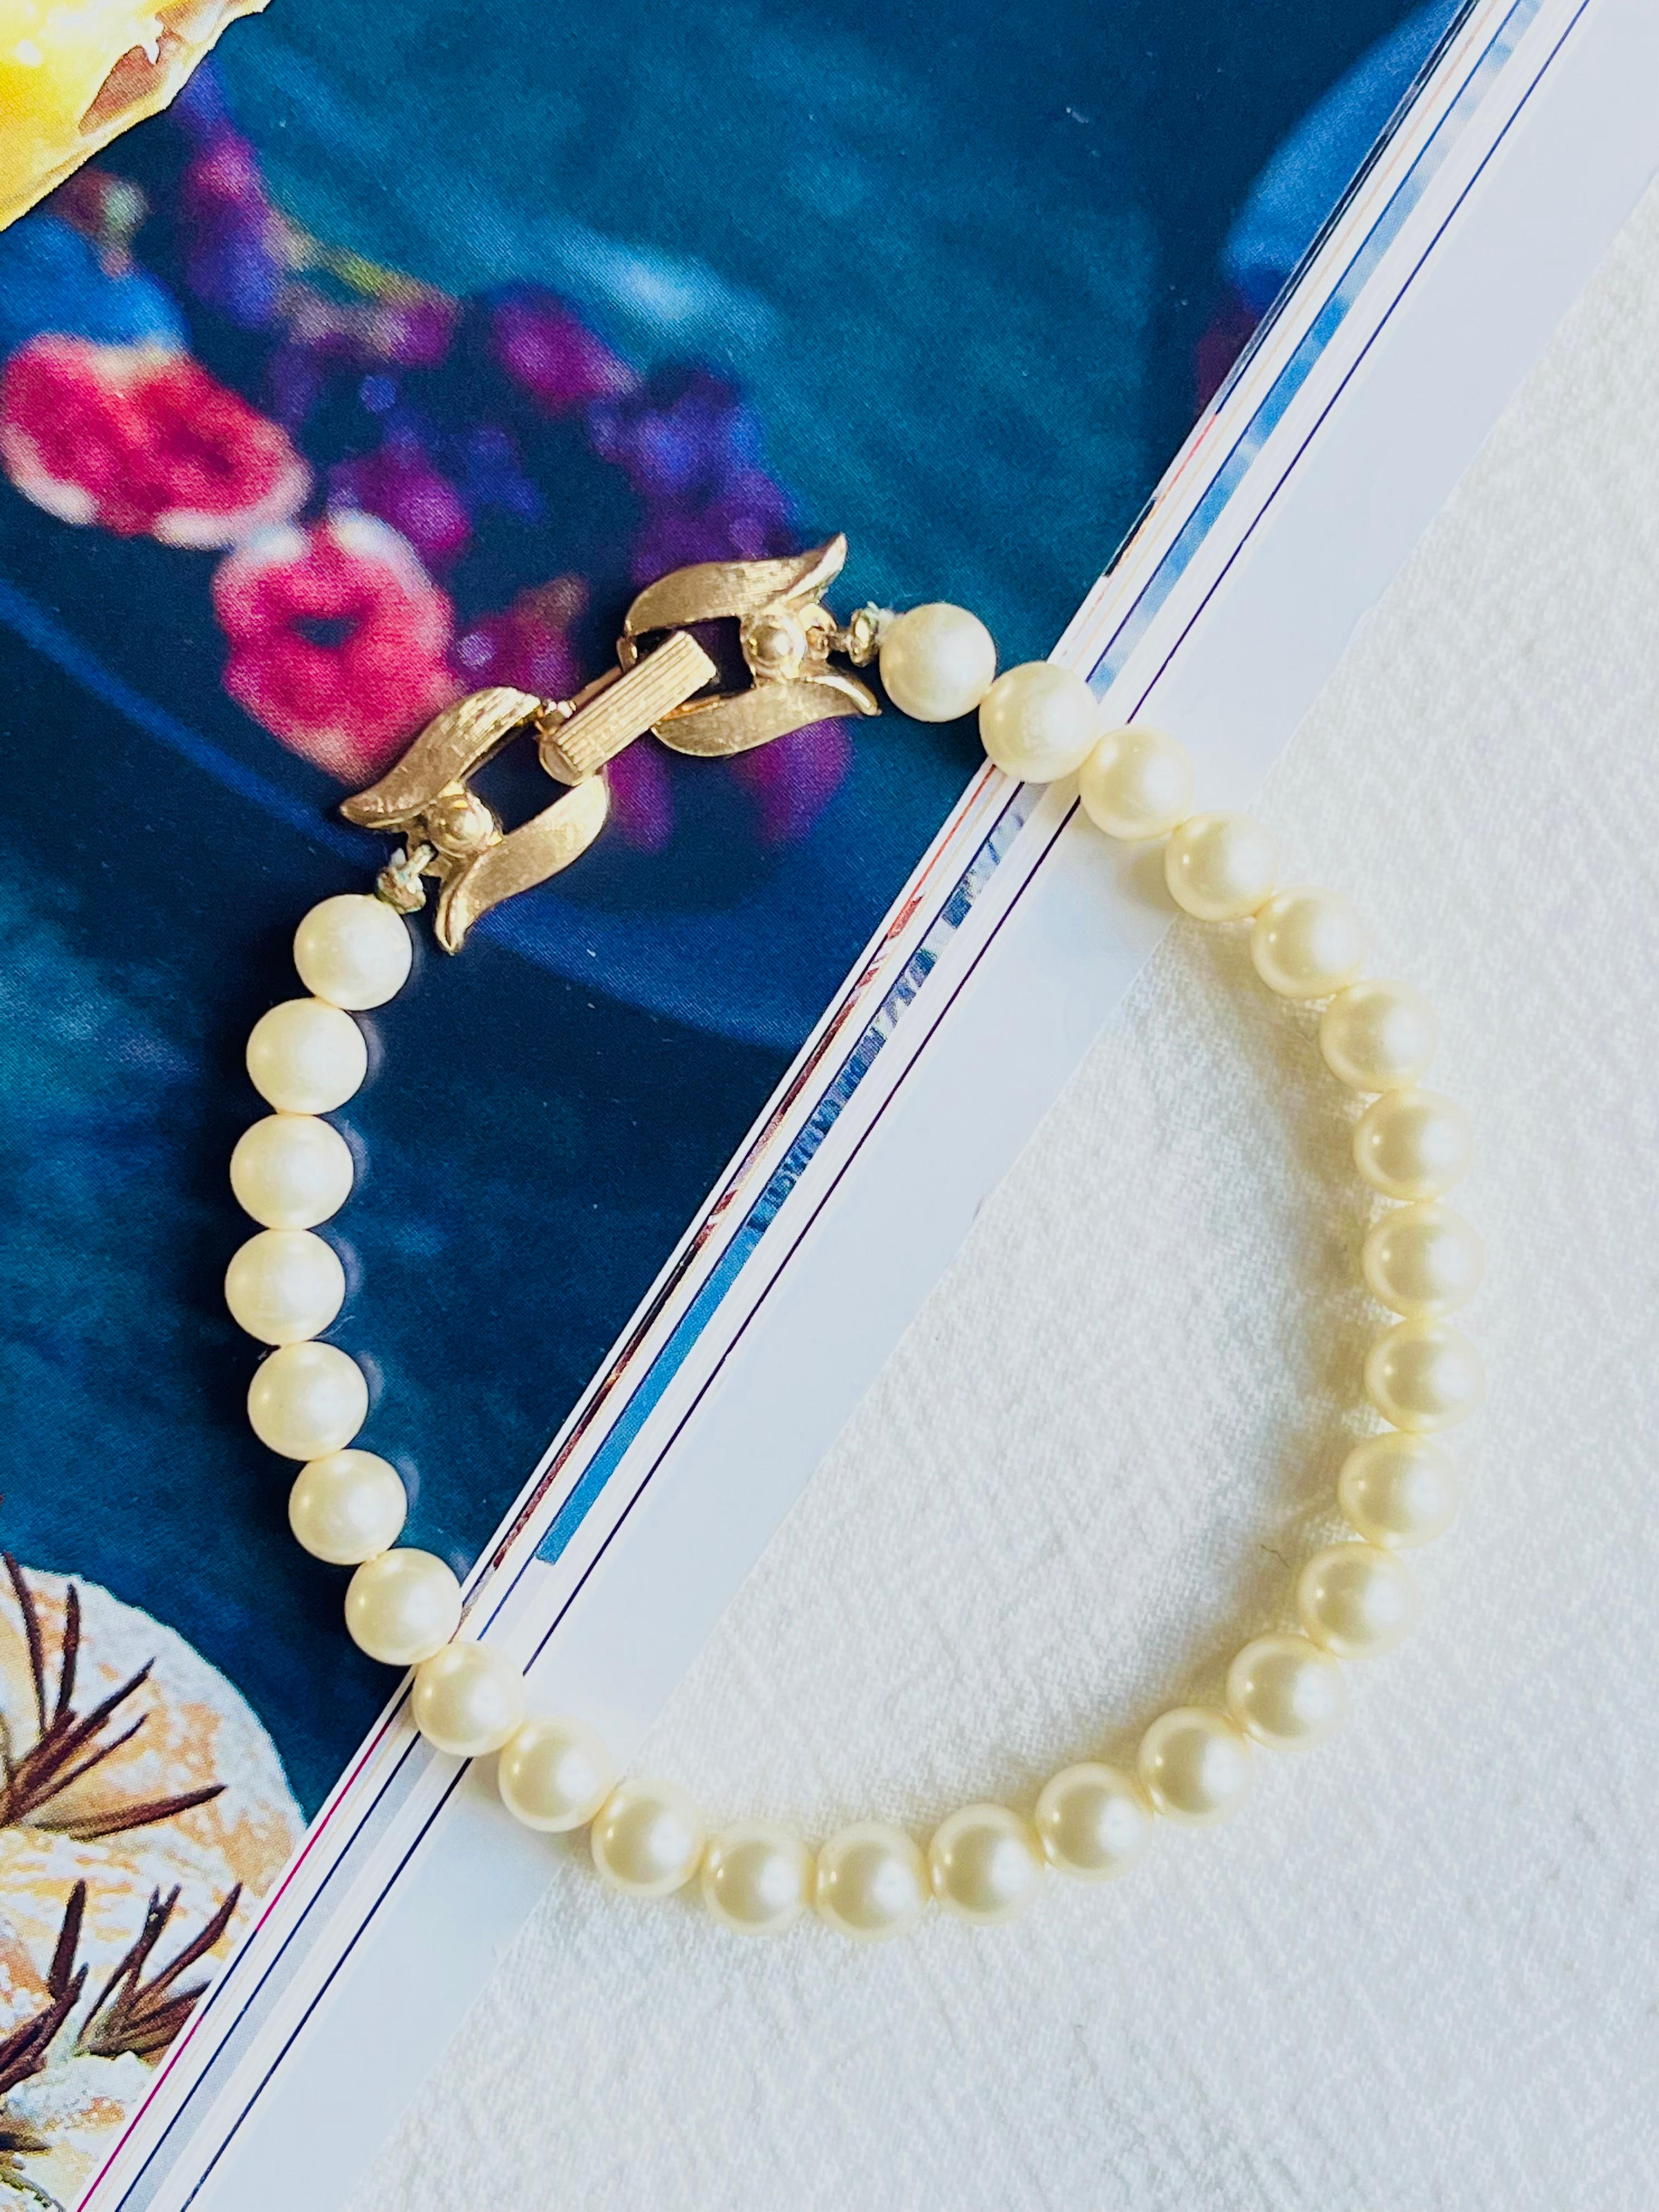 Very good condition. 100% genuine.

Some light scratches, some peel off at near clamp's faux pearls.

A very beautiful bracelet, signed at the back.

Size: 19 cm.

Weight: 12 g.

Crown Trifari created some of the most desirable costume jewellery of